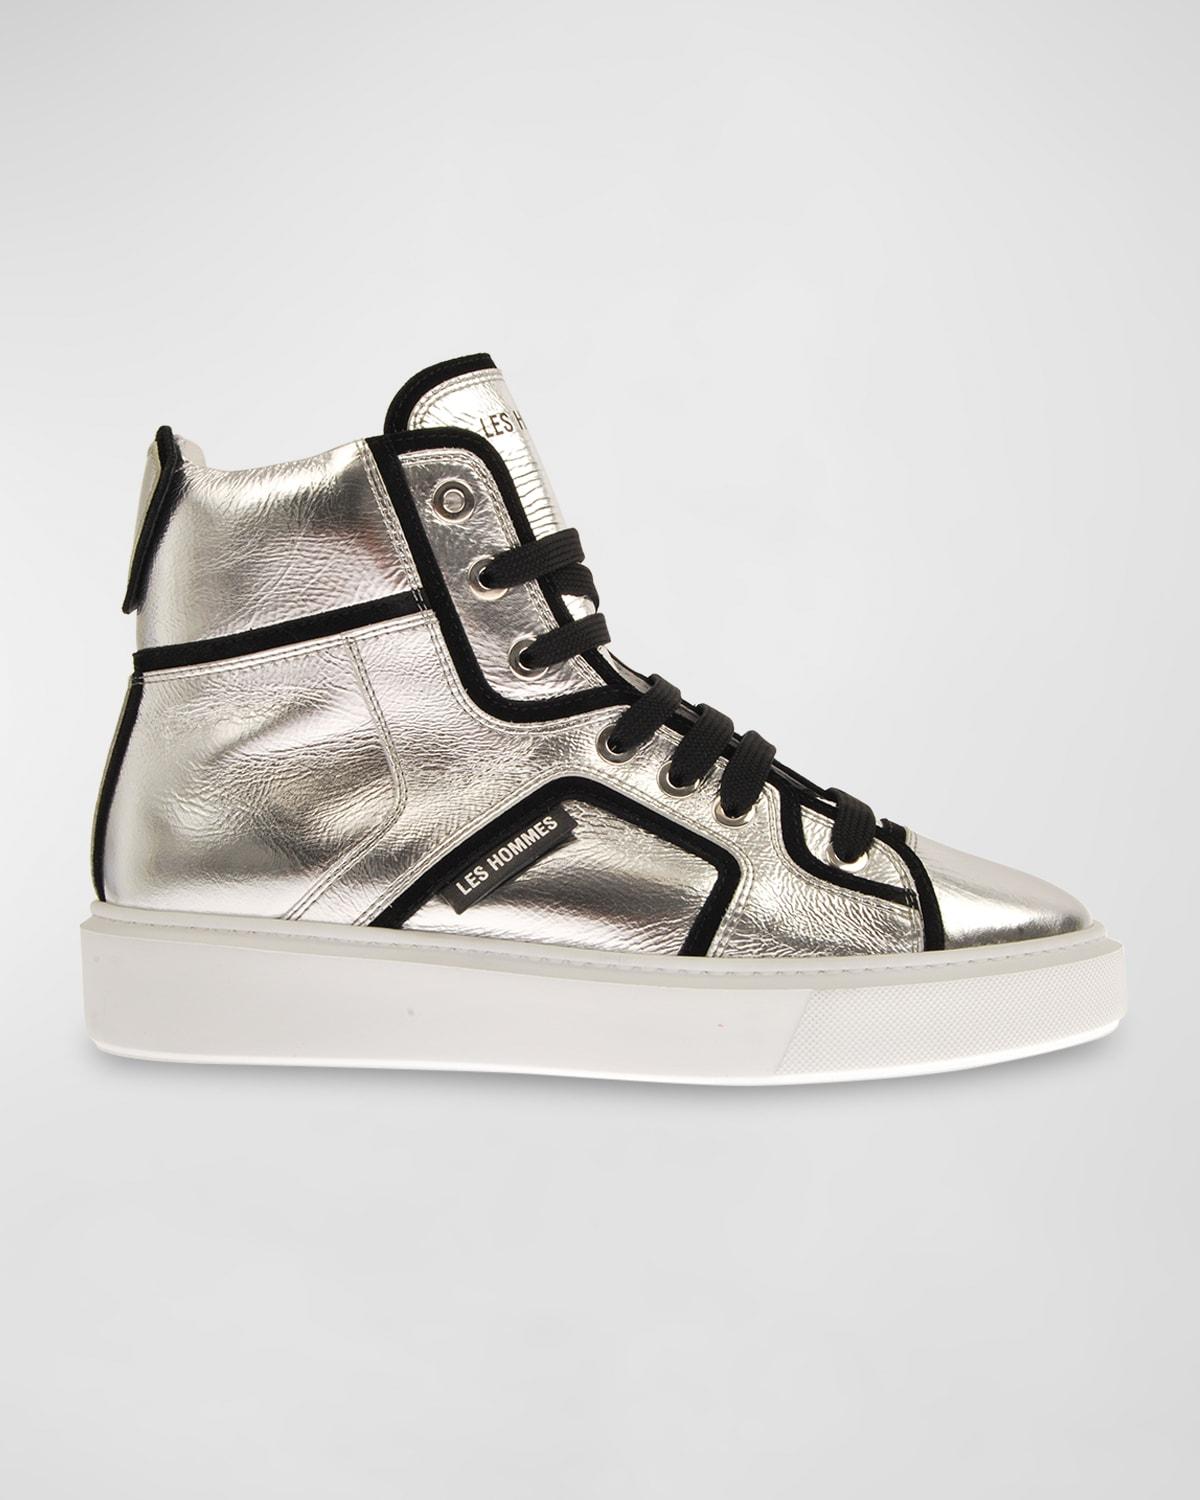 Les Hommes Metallic Leather High-top Sneakers in Natural for Men | Lyst